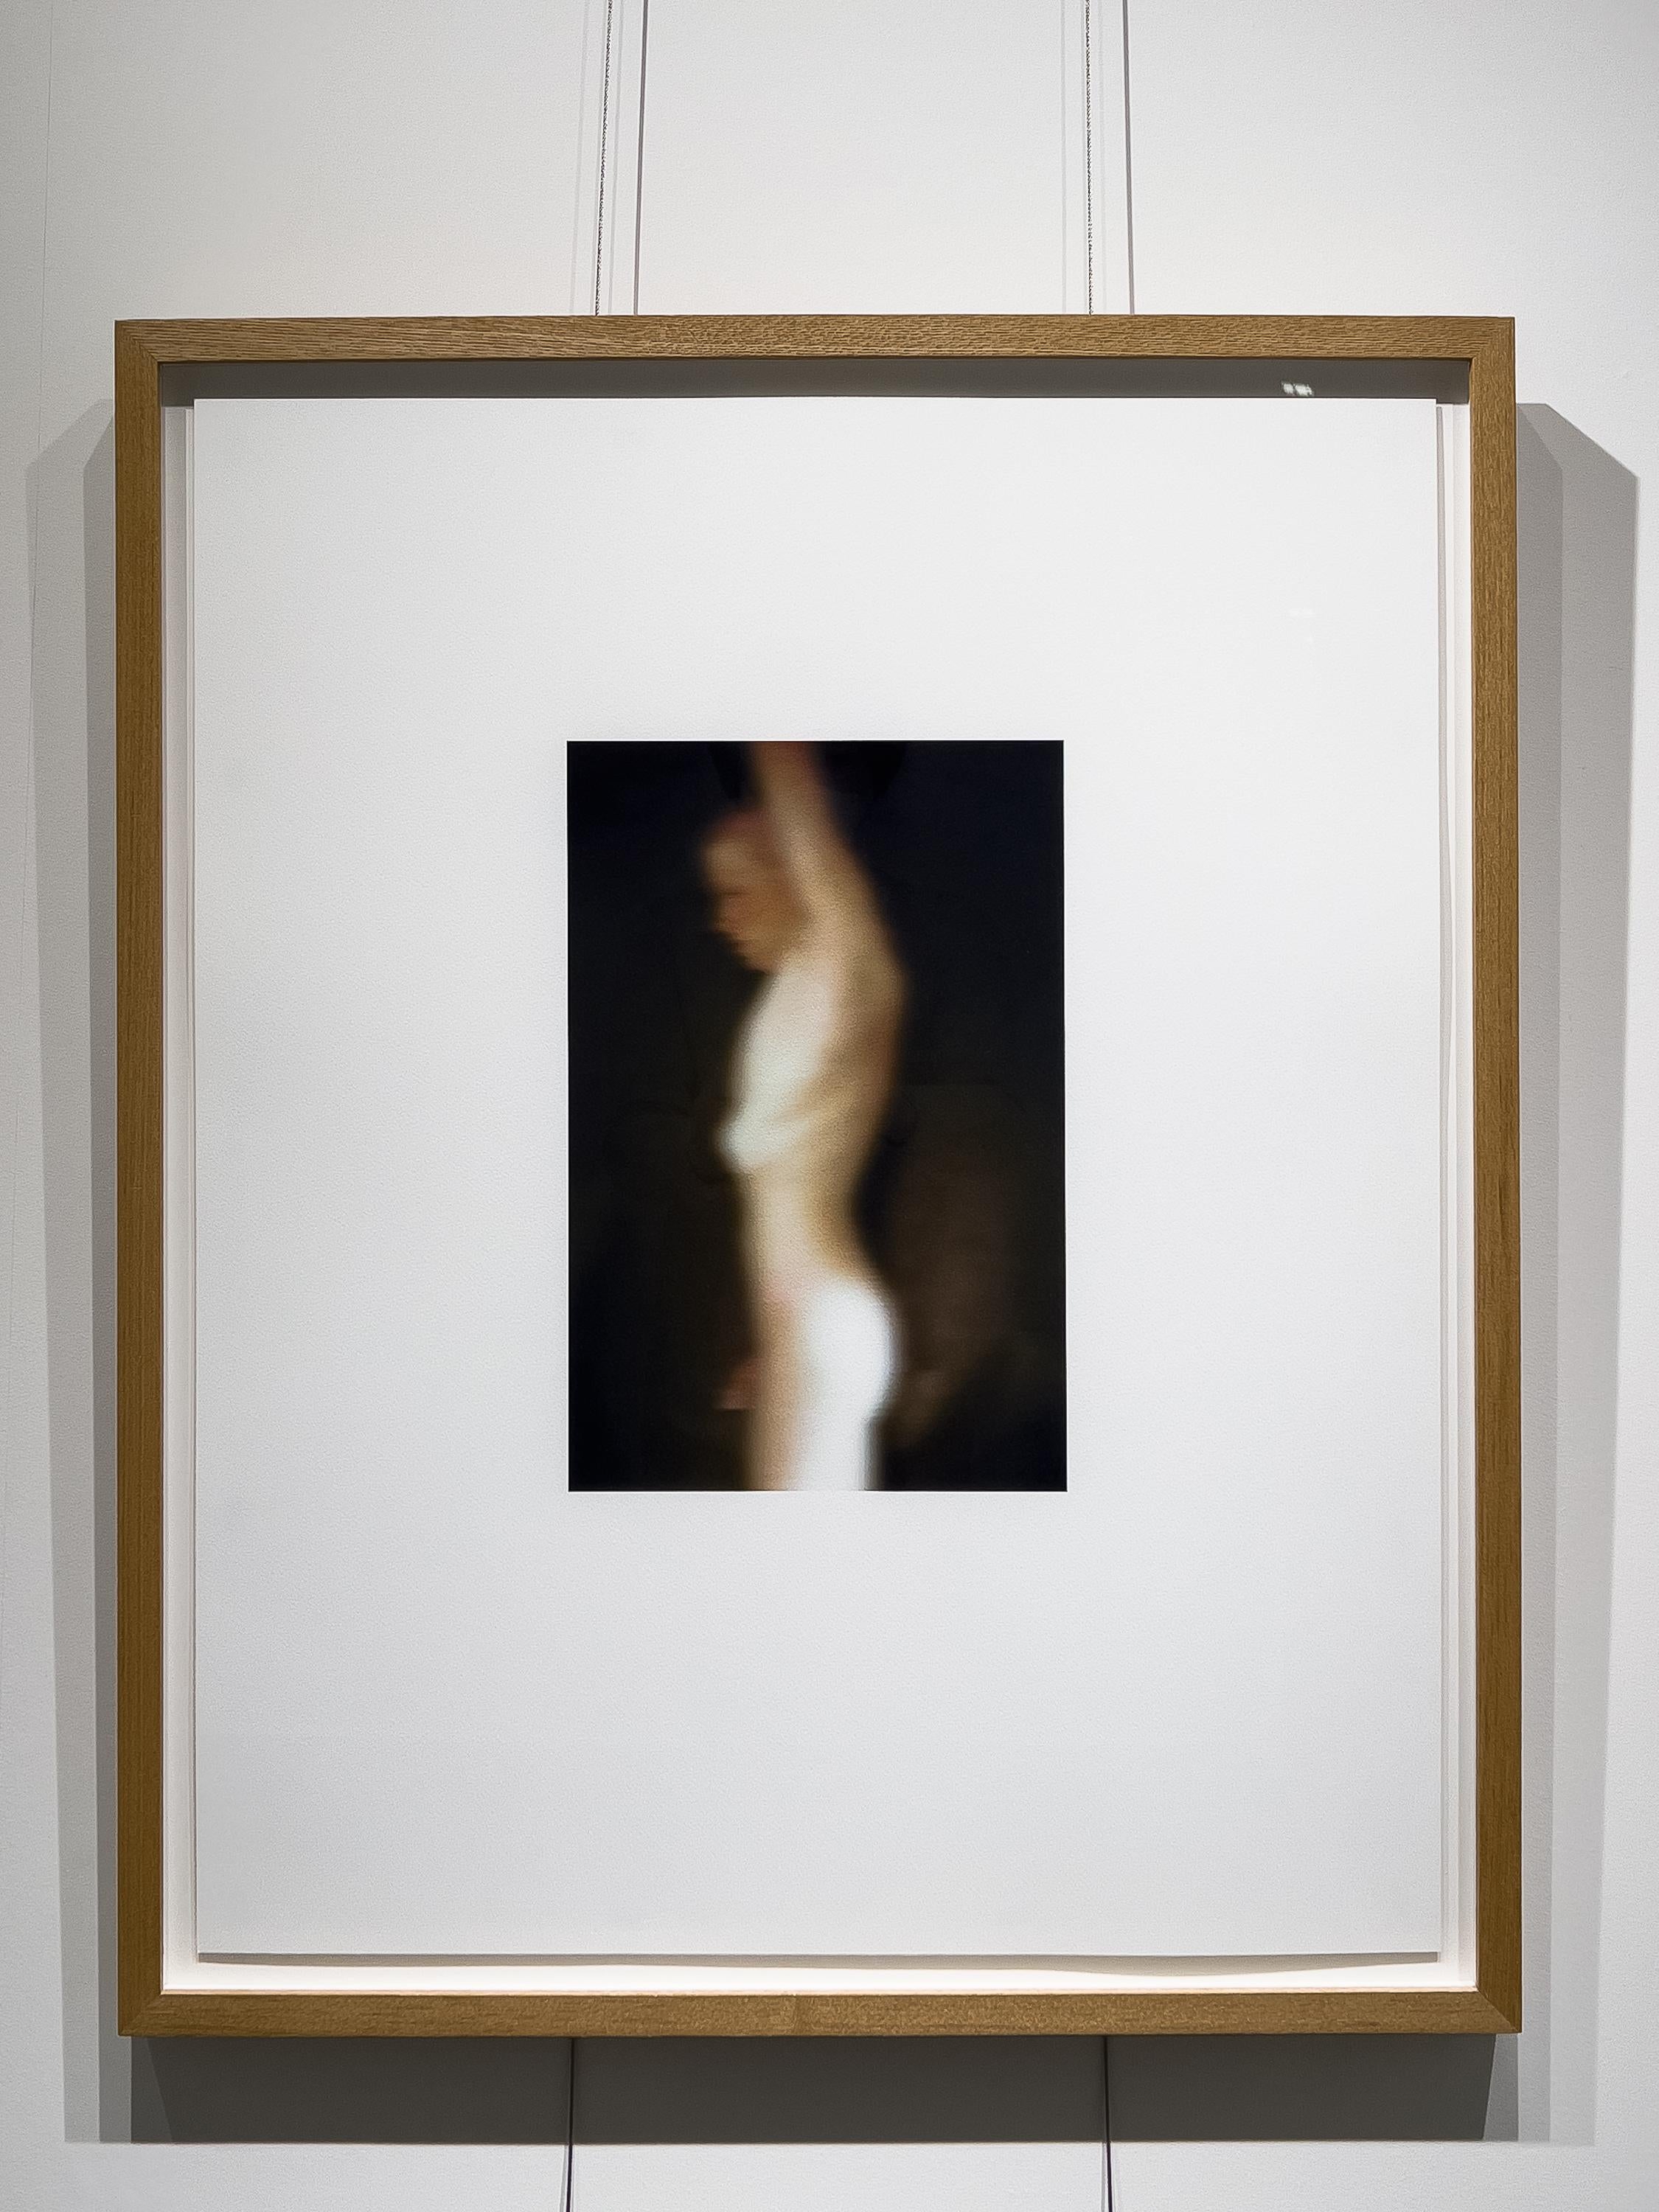 Nudes (Schellmann 96), photography: Iris print, edition of 50 by Thomas Ruff For Sale 1